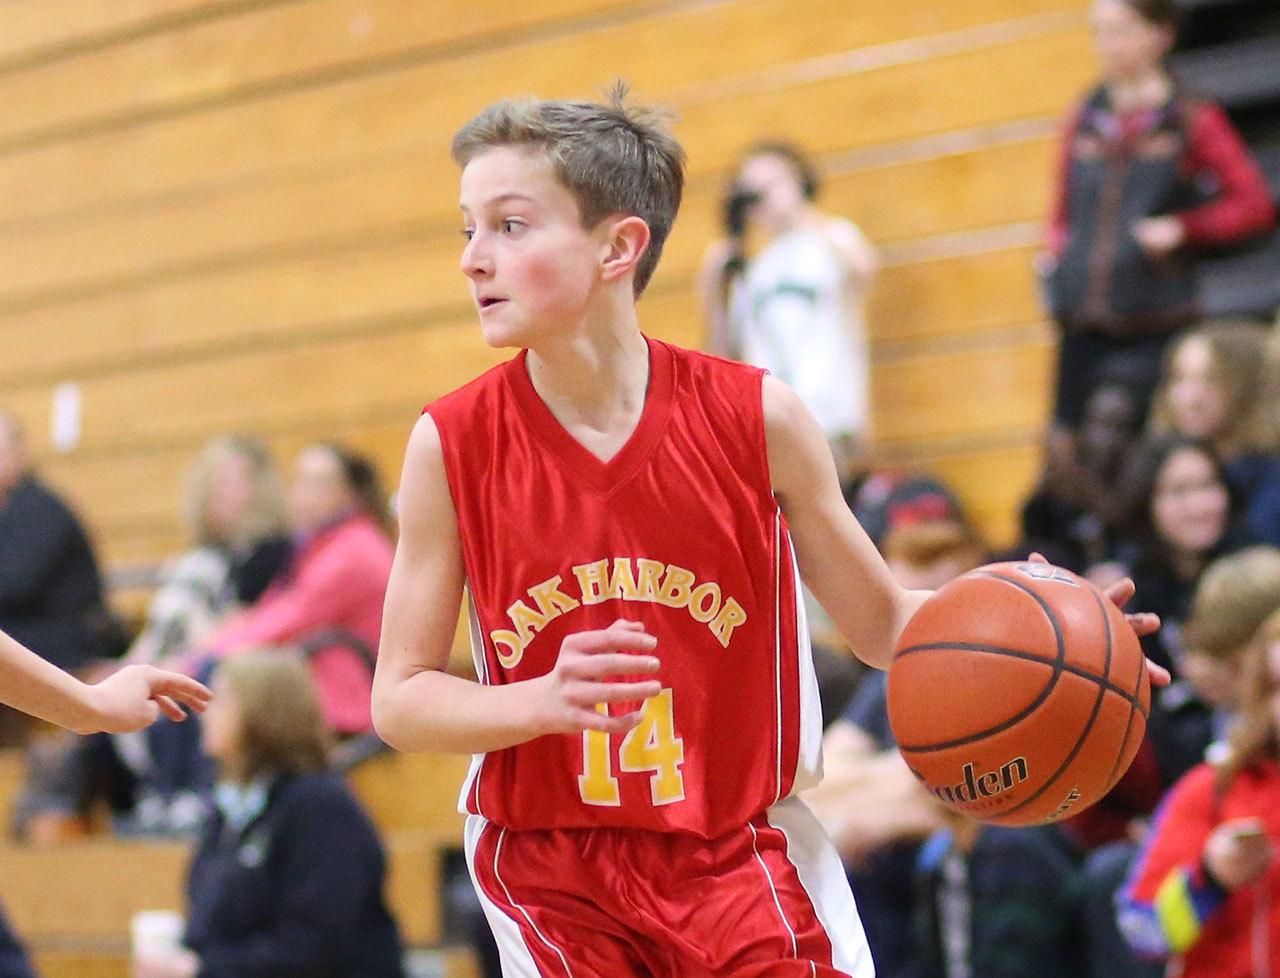 Oak Harbor seventh-grader Will Rankin looks over the defense. Rankin had 6 points, 5 rebounds, 2 blocks and 7 steals in the game. (Photo by John Fisken)